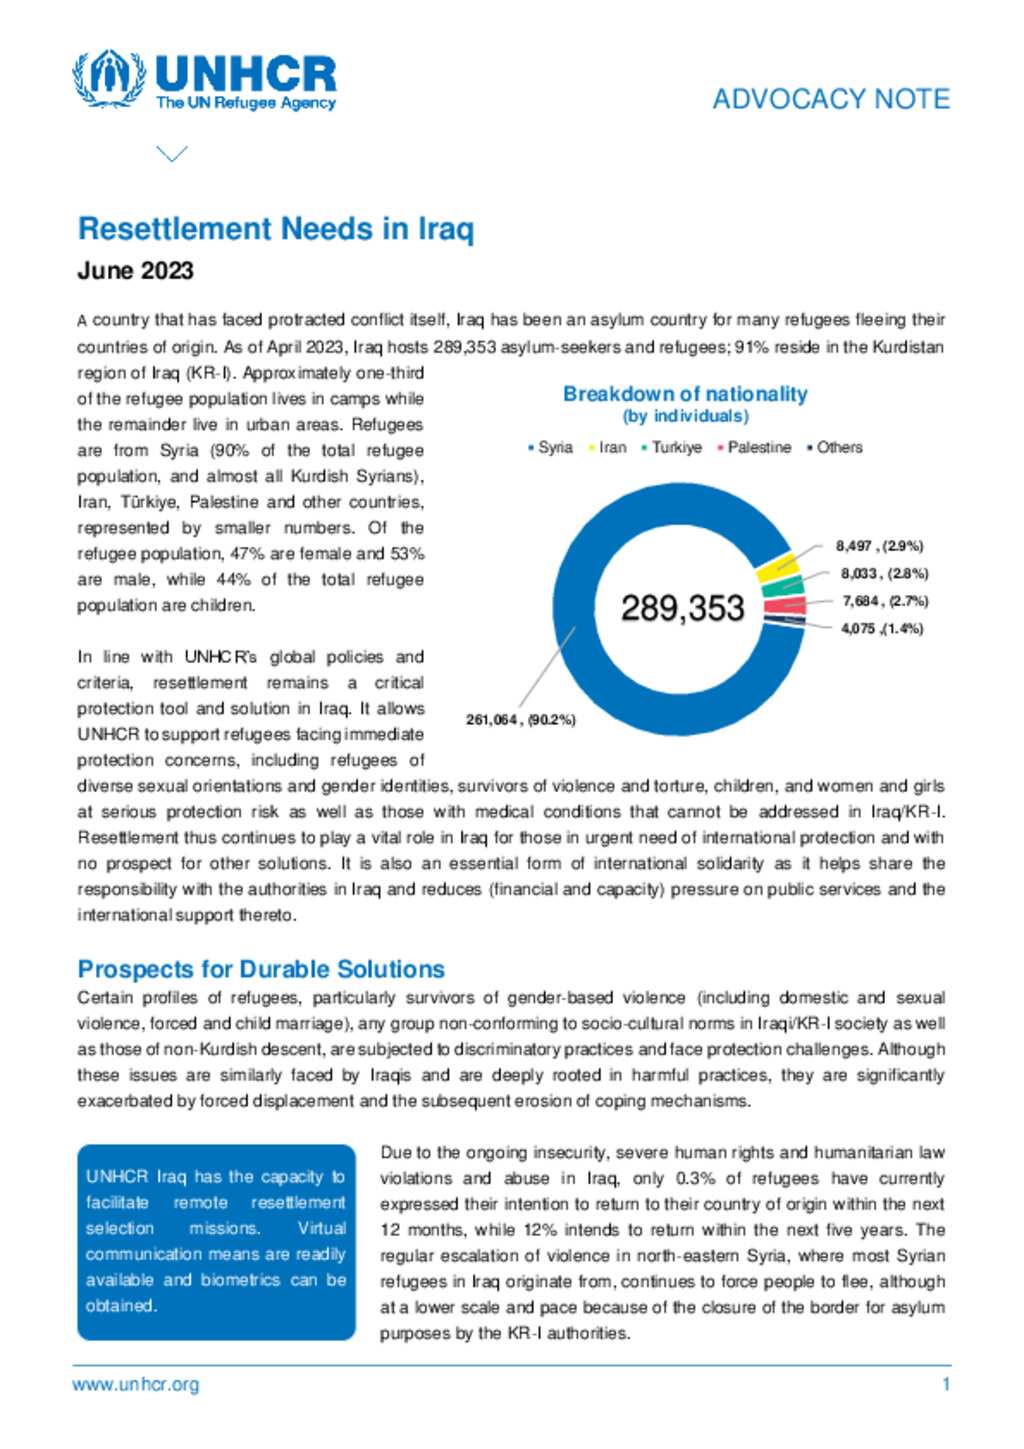 Document - Advocacy Note on the Resettlement Needs in Iraq - June 2023